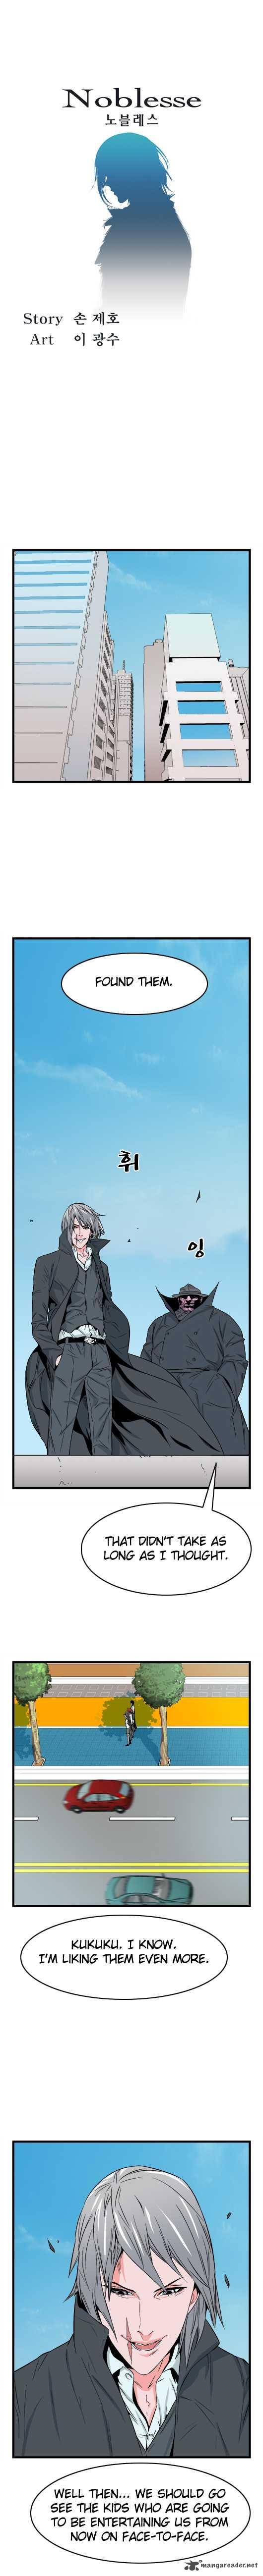 Noblesse 22 1